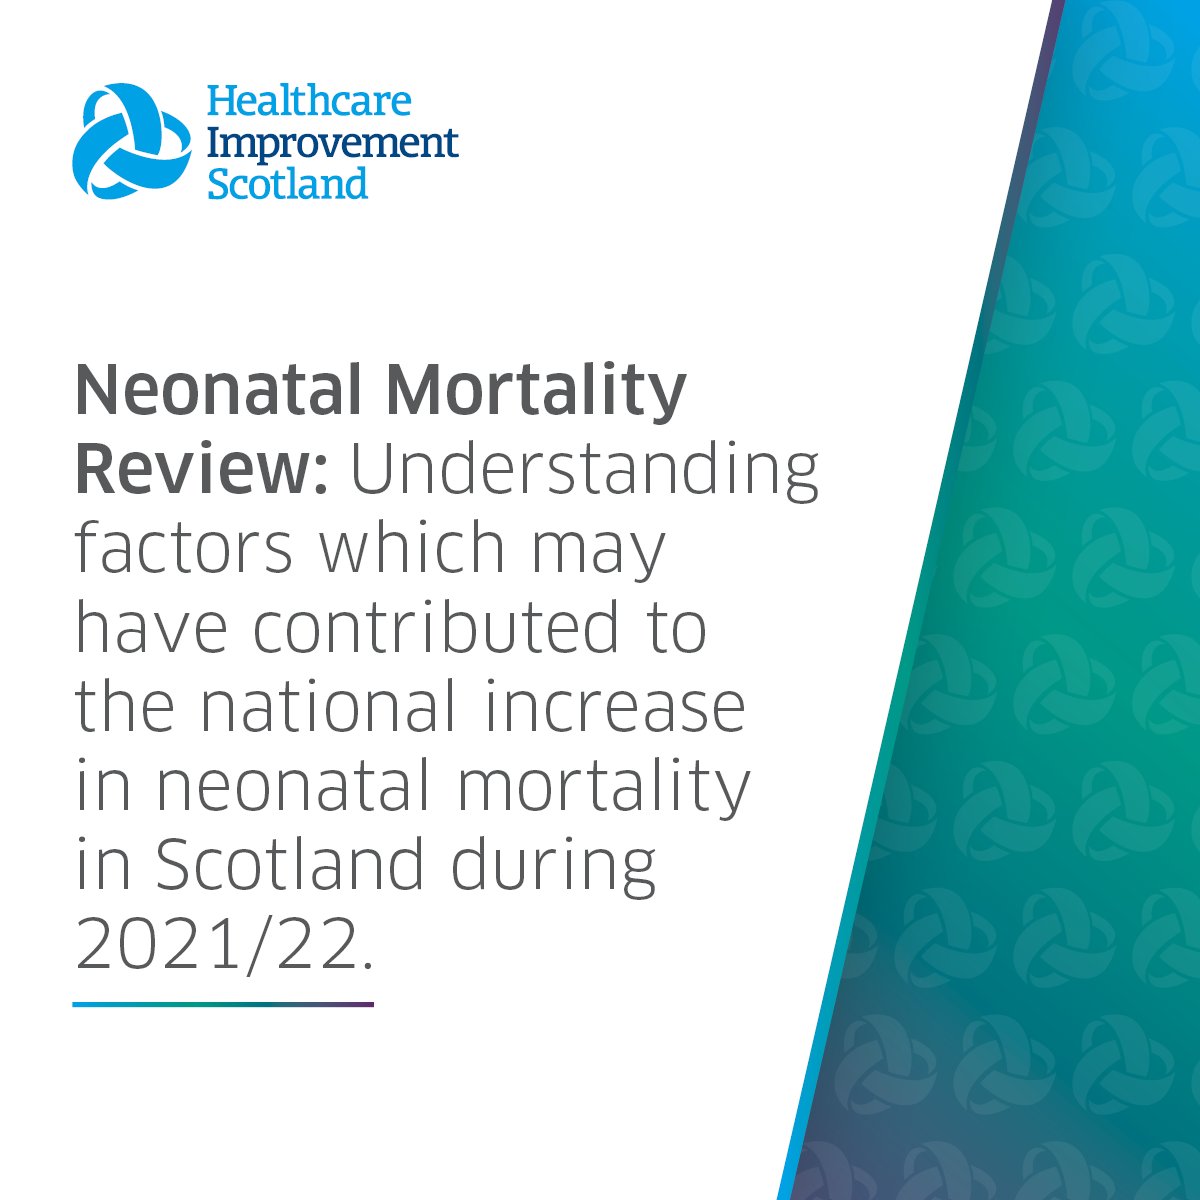 A report into a rise in neonatal deaths between 2021/22 has identified various factors that appear to have contributed to the increase, rather than one single identifiable cause. To read the report, follow the link in the comments. #BabyLoss #MaternitySafety #PregnancyLoss